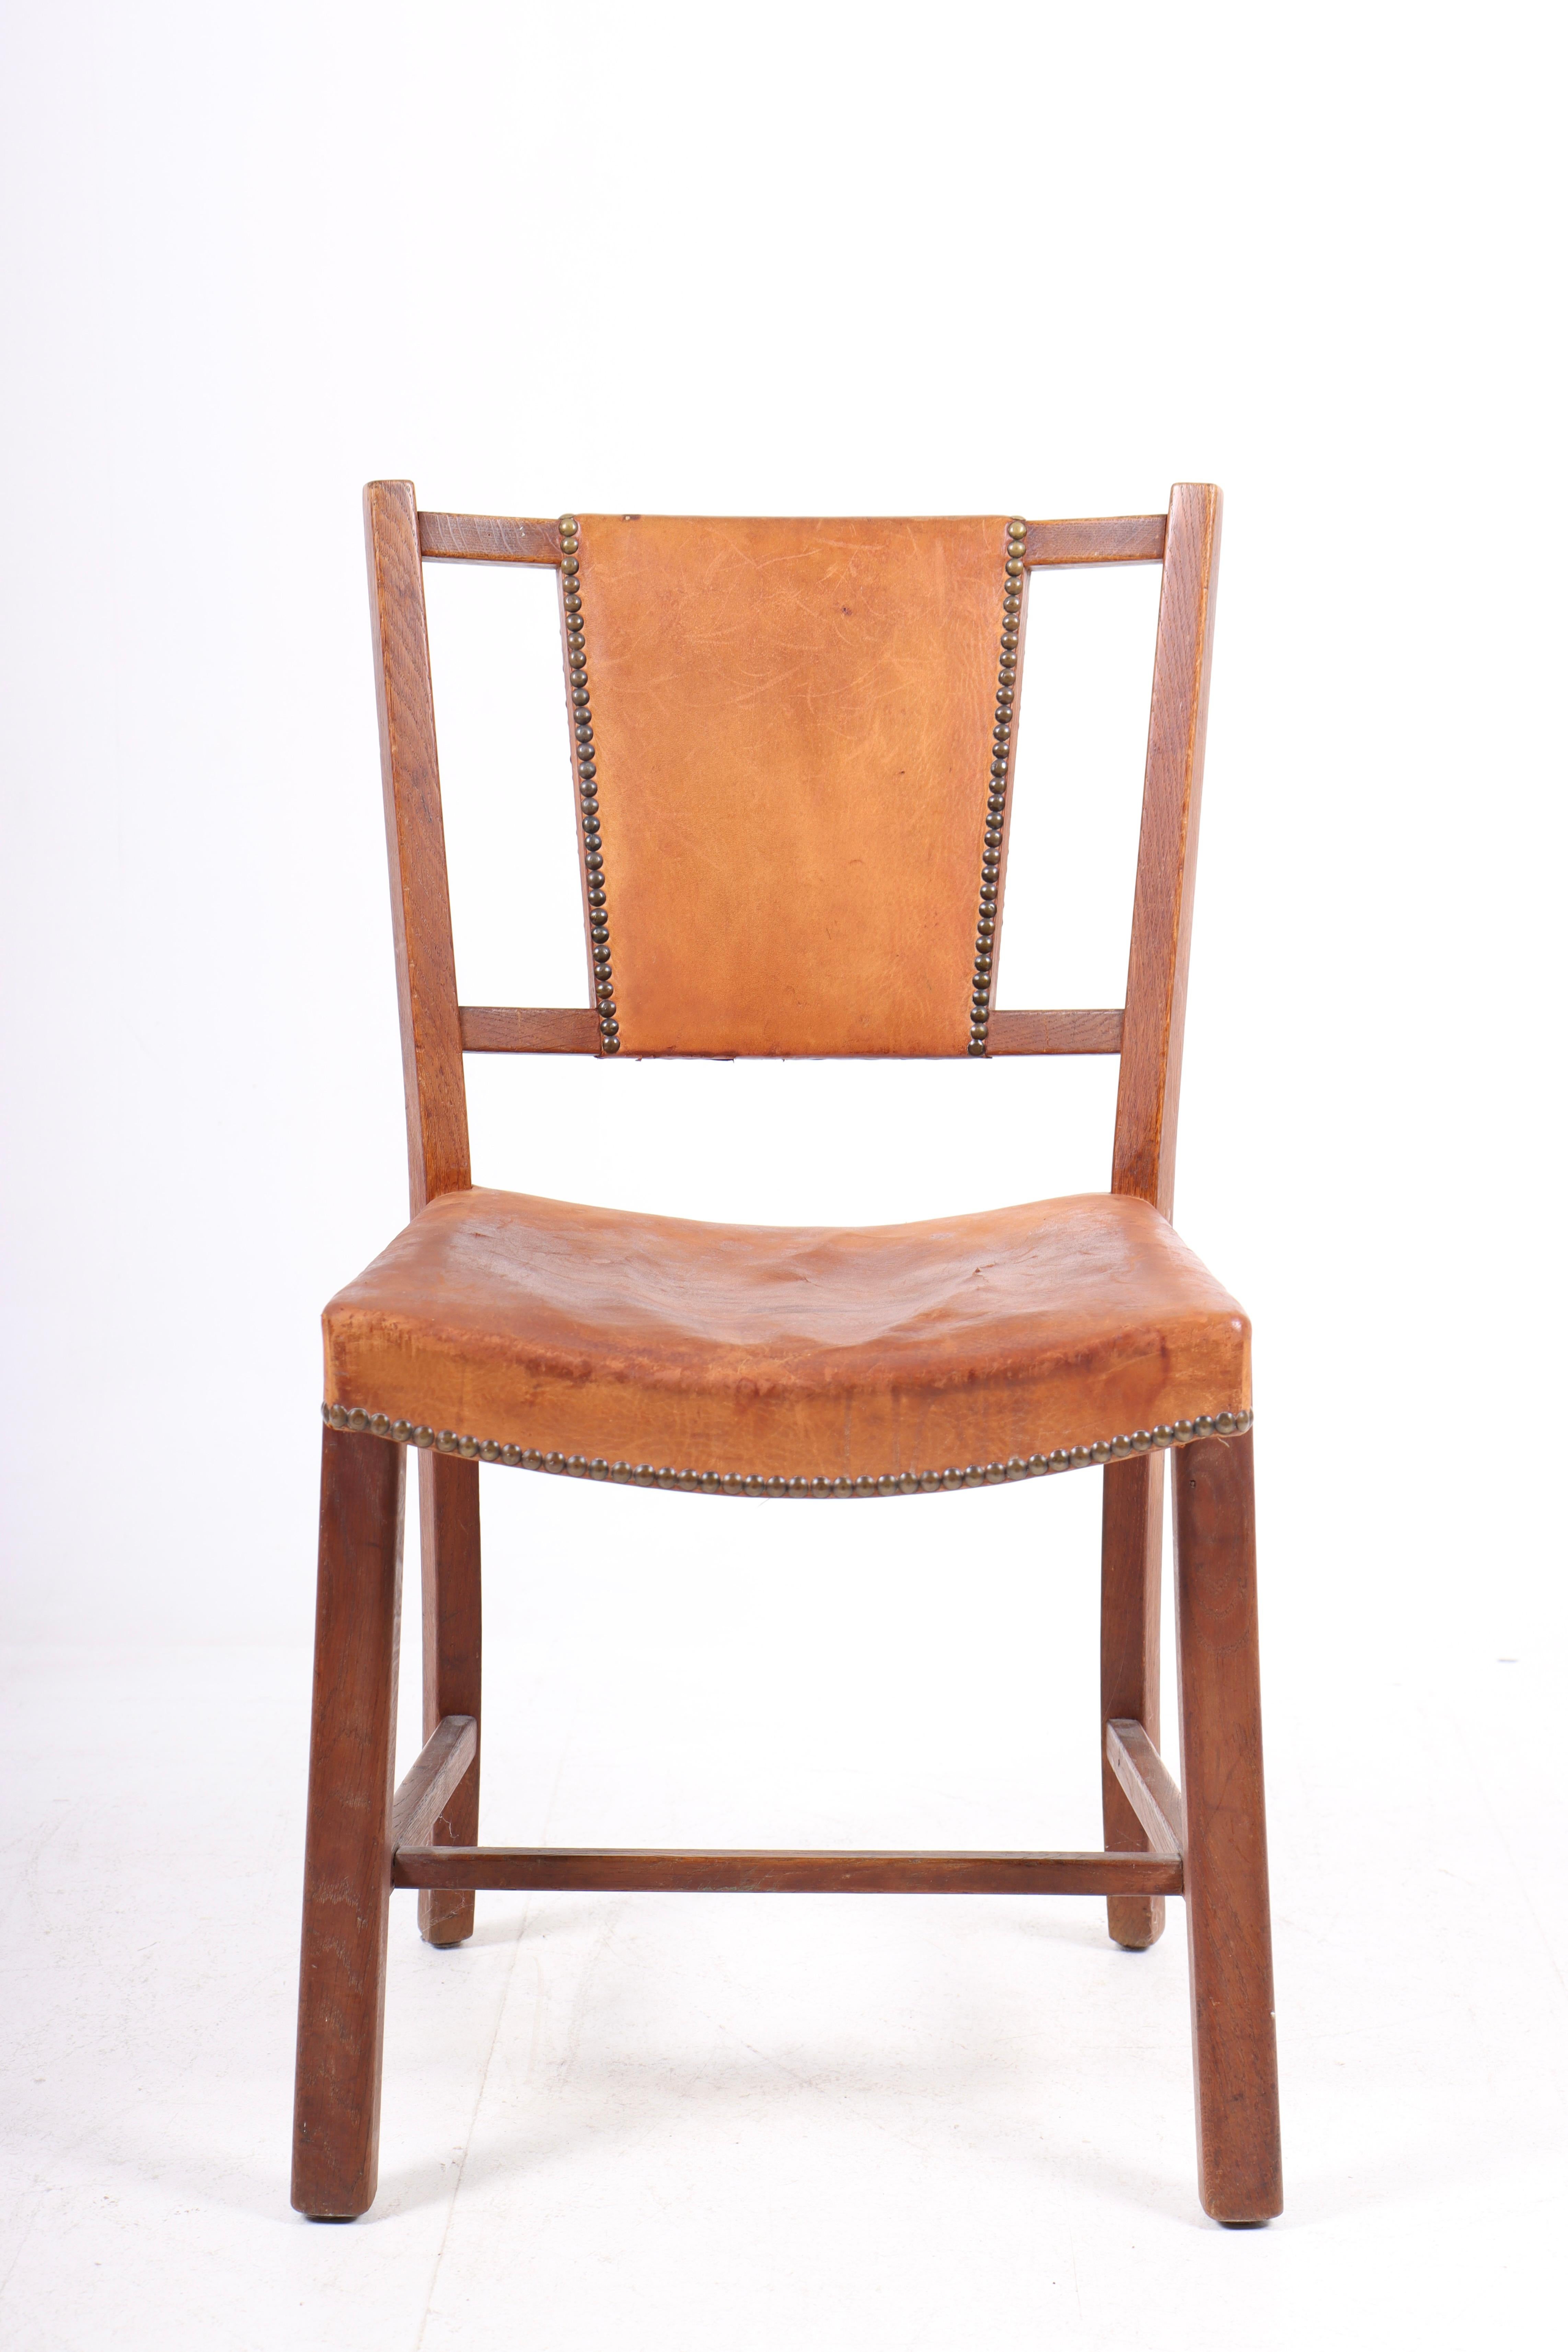 Danish side chair in patinated leather and oak. Designed and made in Denmark, original condition.